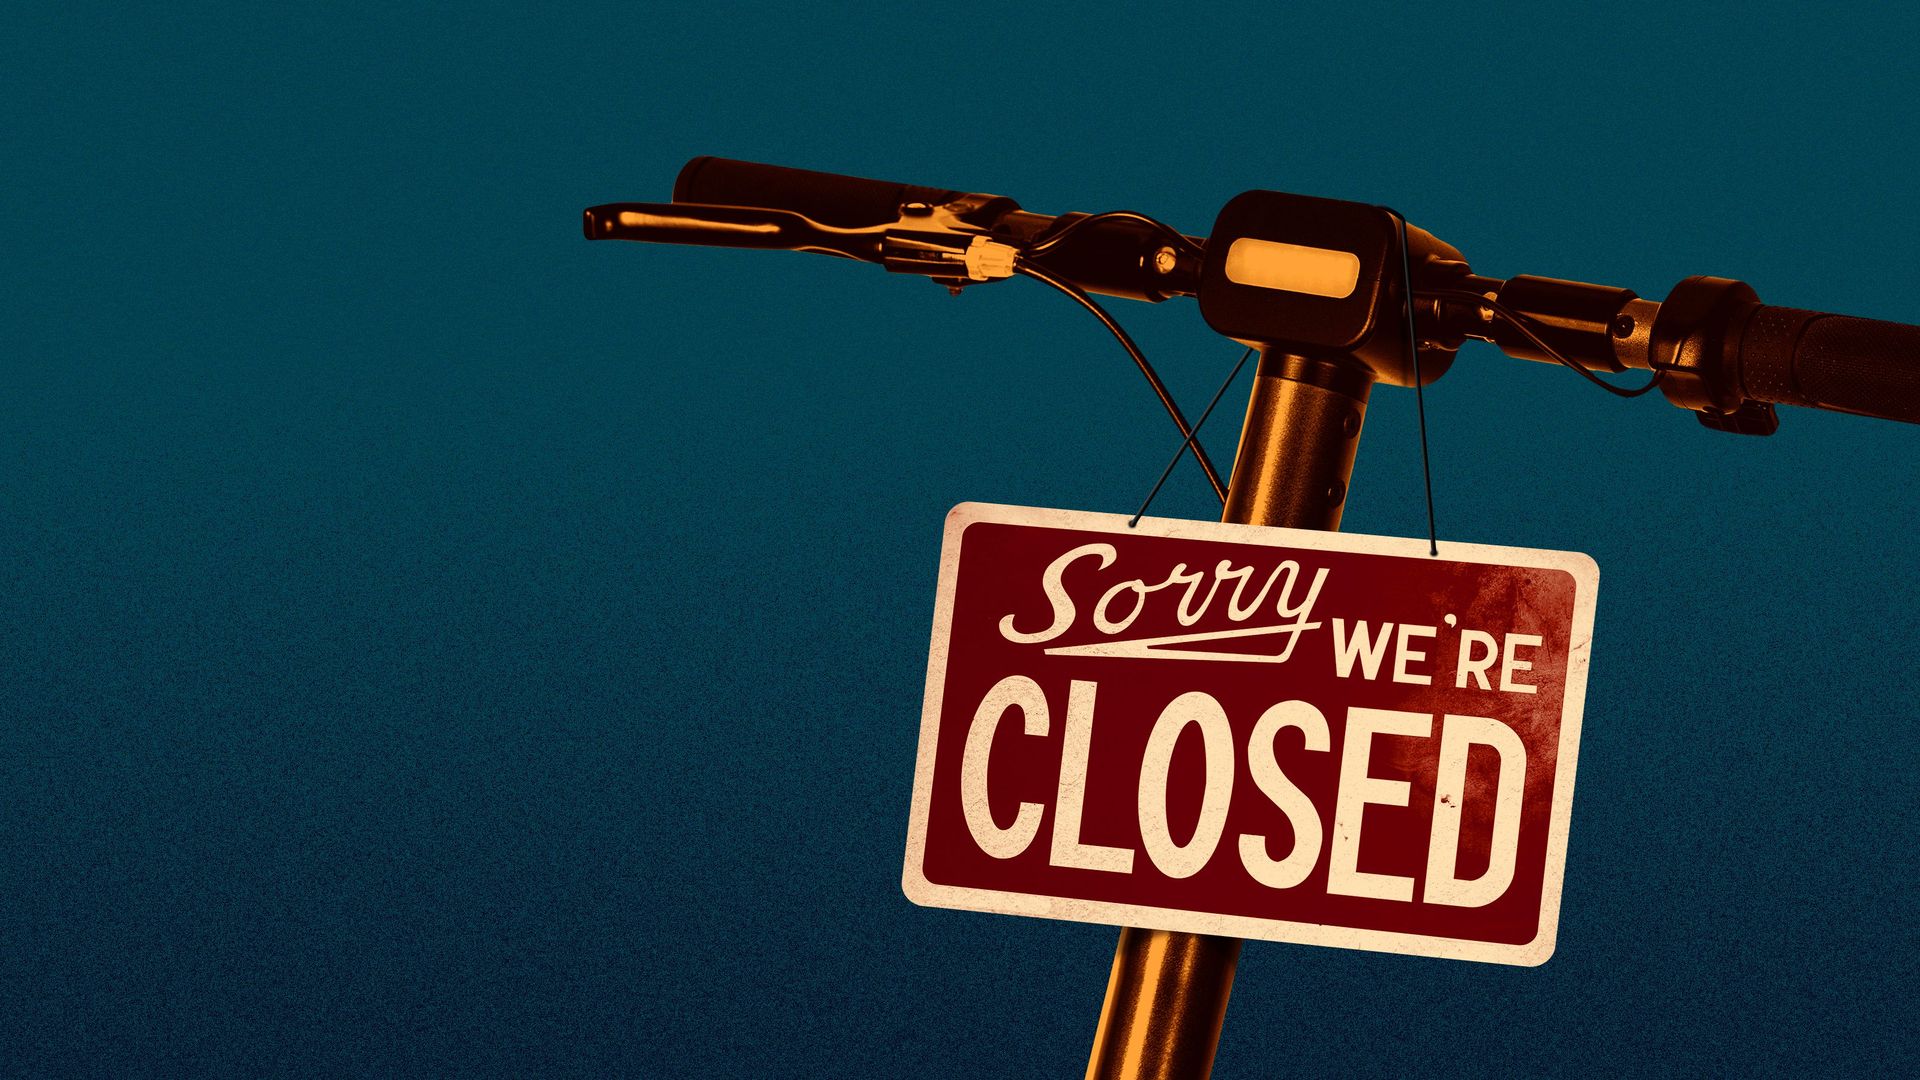 Illustration of an electric scooter with a "Sorry, we're closed" sign hanging from the handlebars.